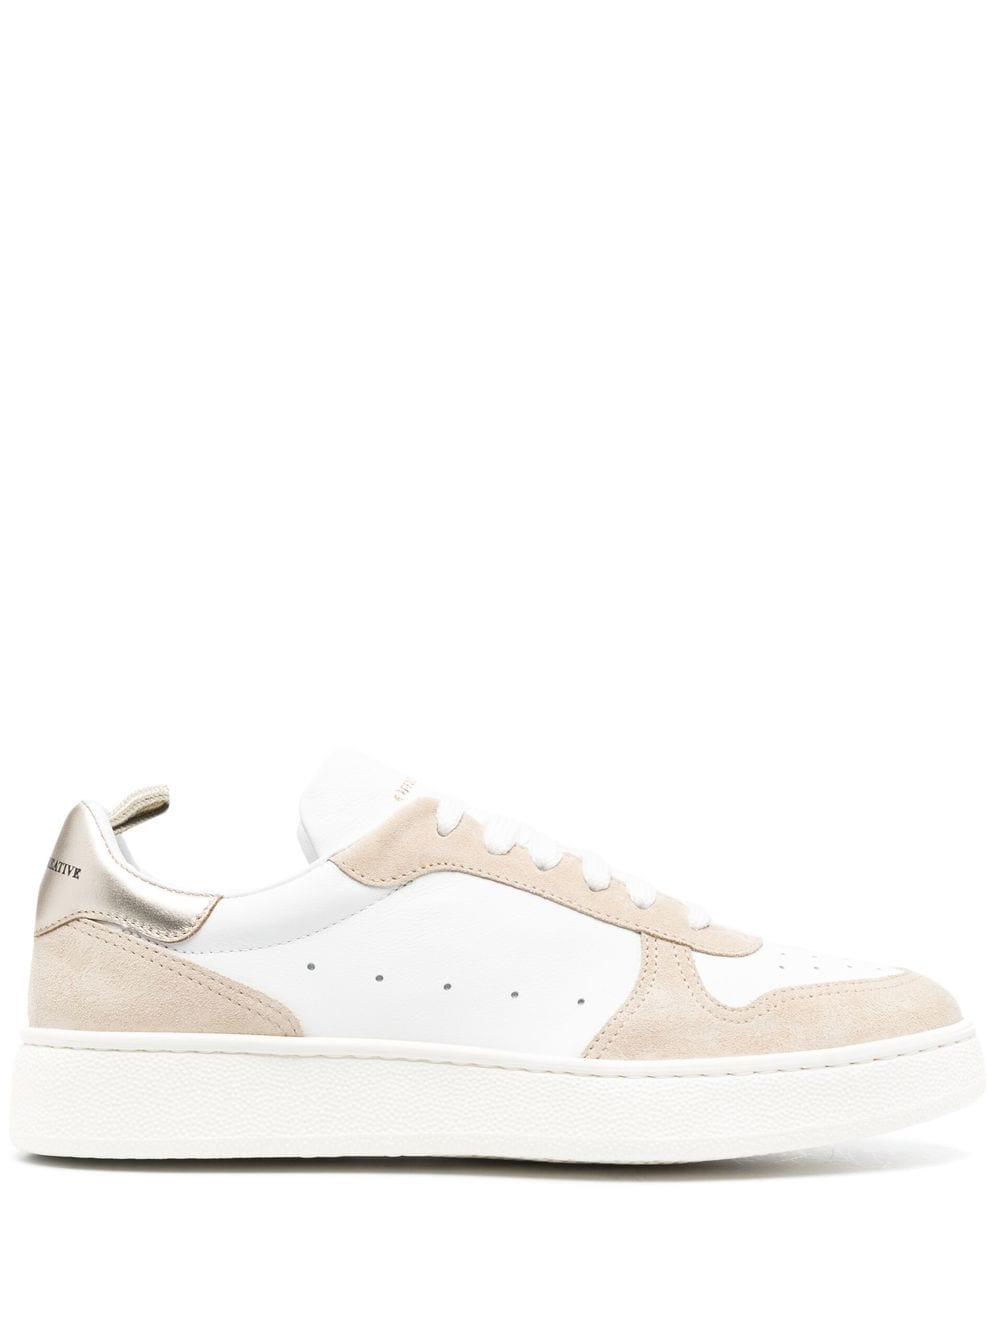 Officine Creative Mower/110 Low-top Sneakers in White | Lyst